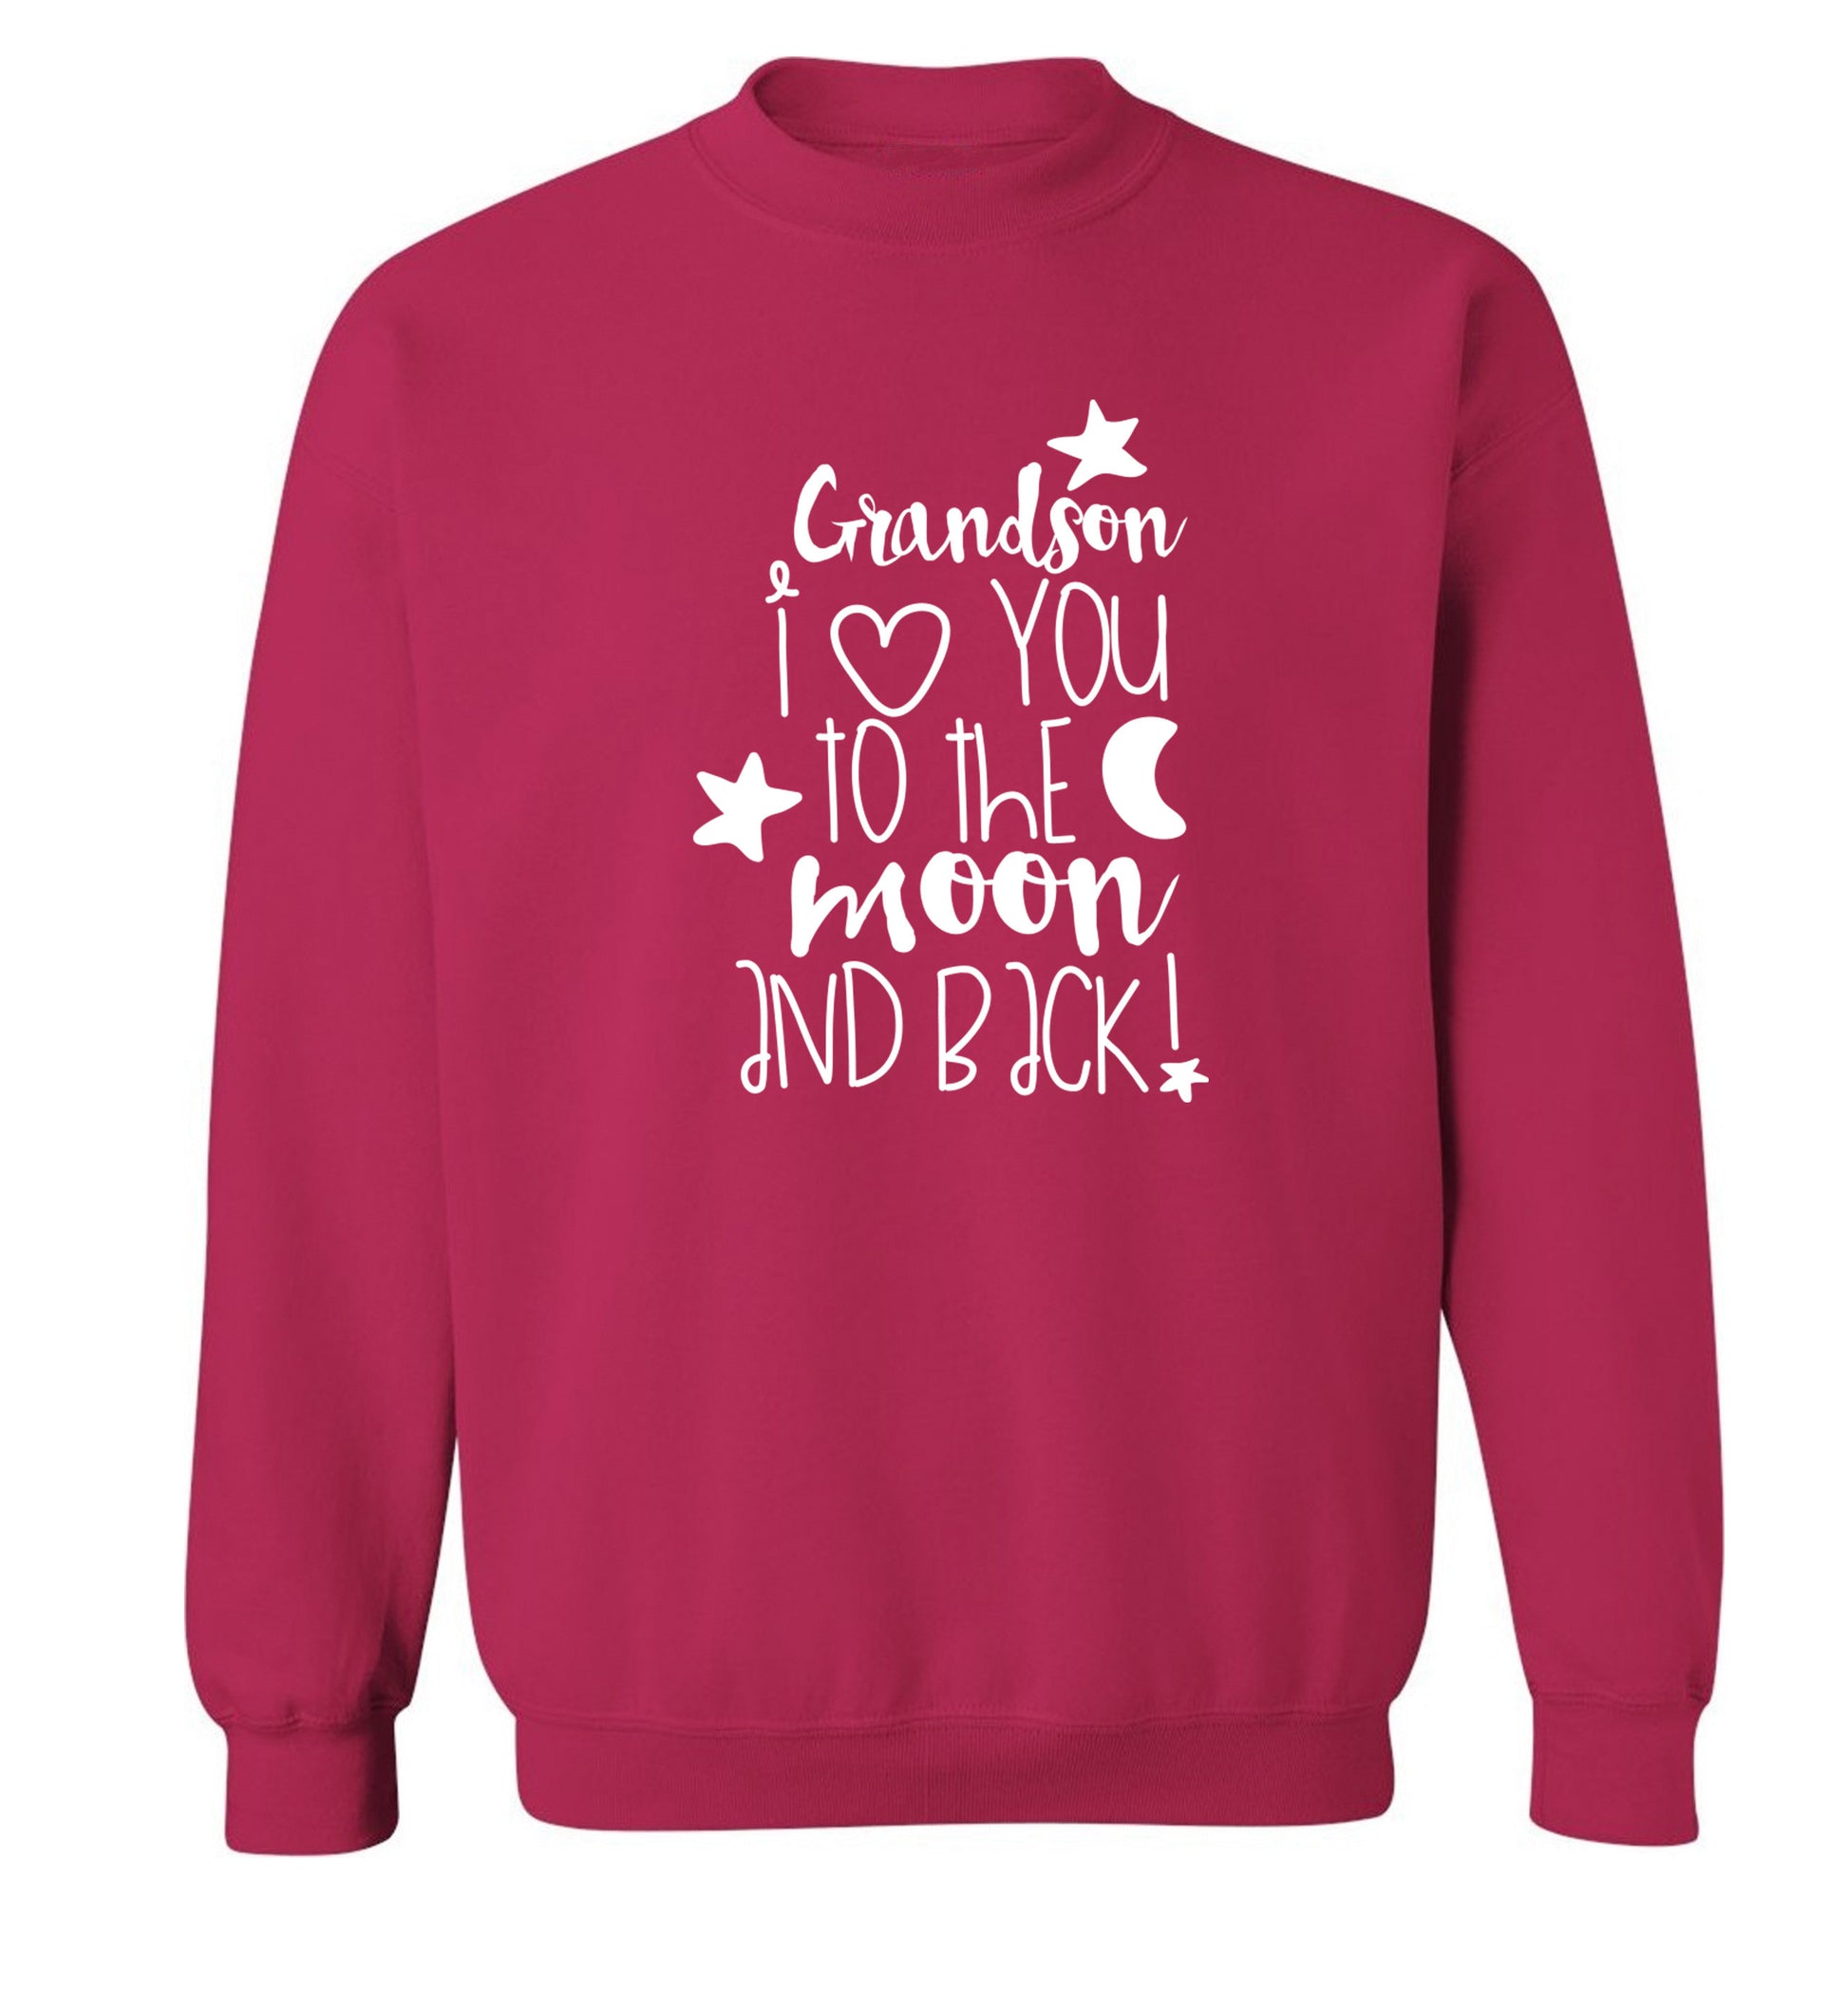 Grandson I love you to the moon and back Adult's unisex pink  sweater XL